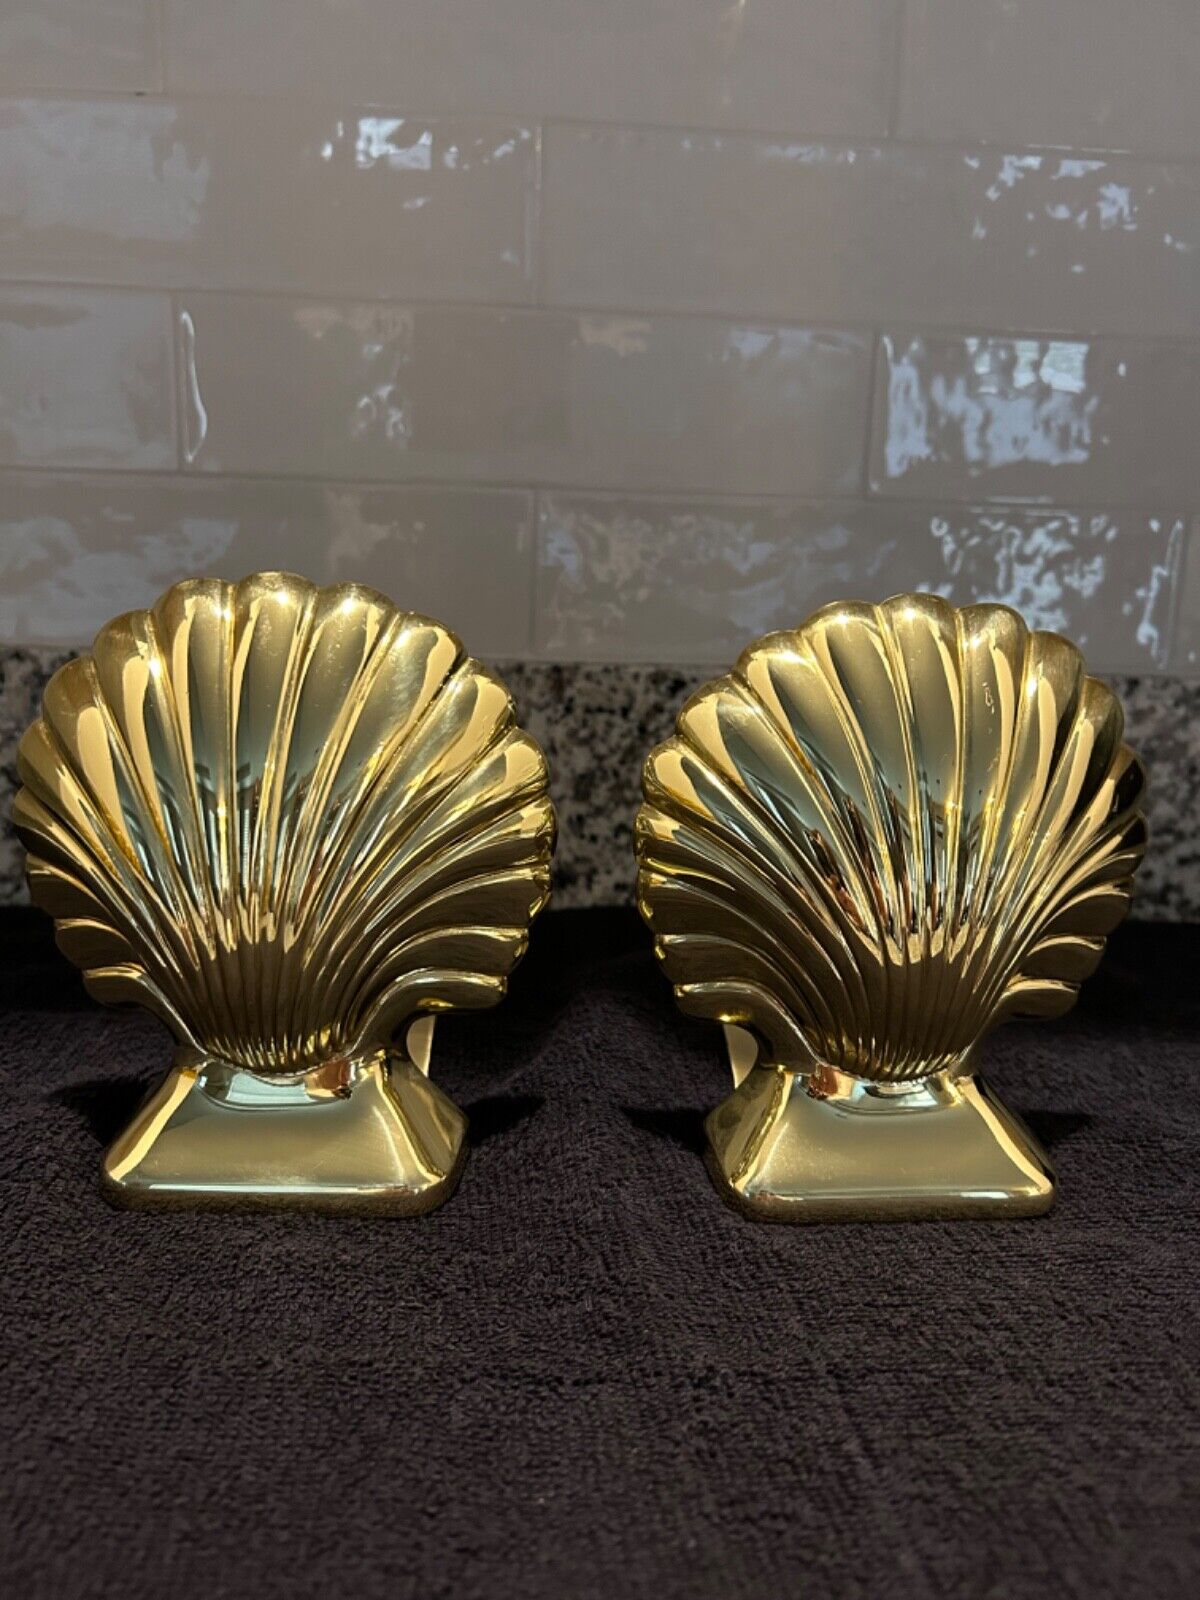 VTG Baldwin Brass Scallop Shell Bookends - Amer. Musuem Collection - Pristine